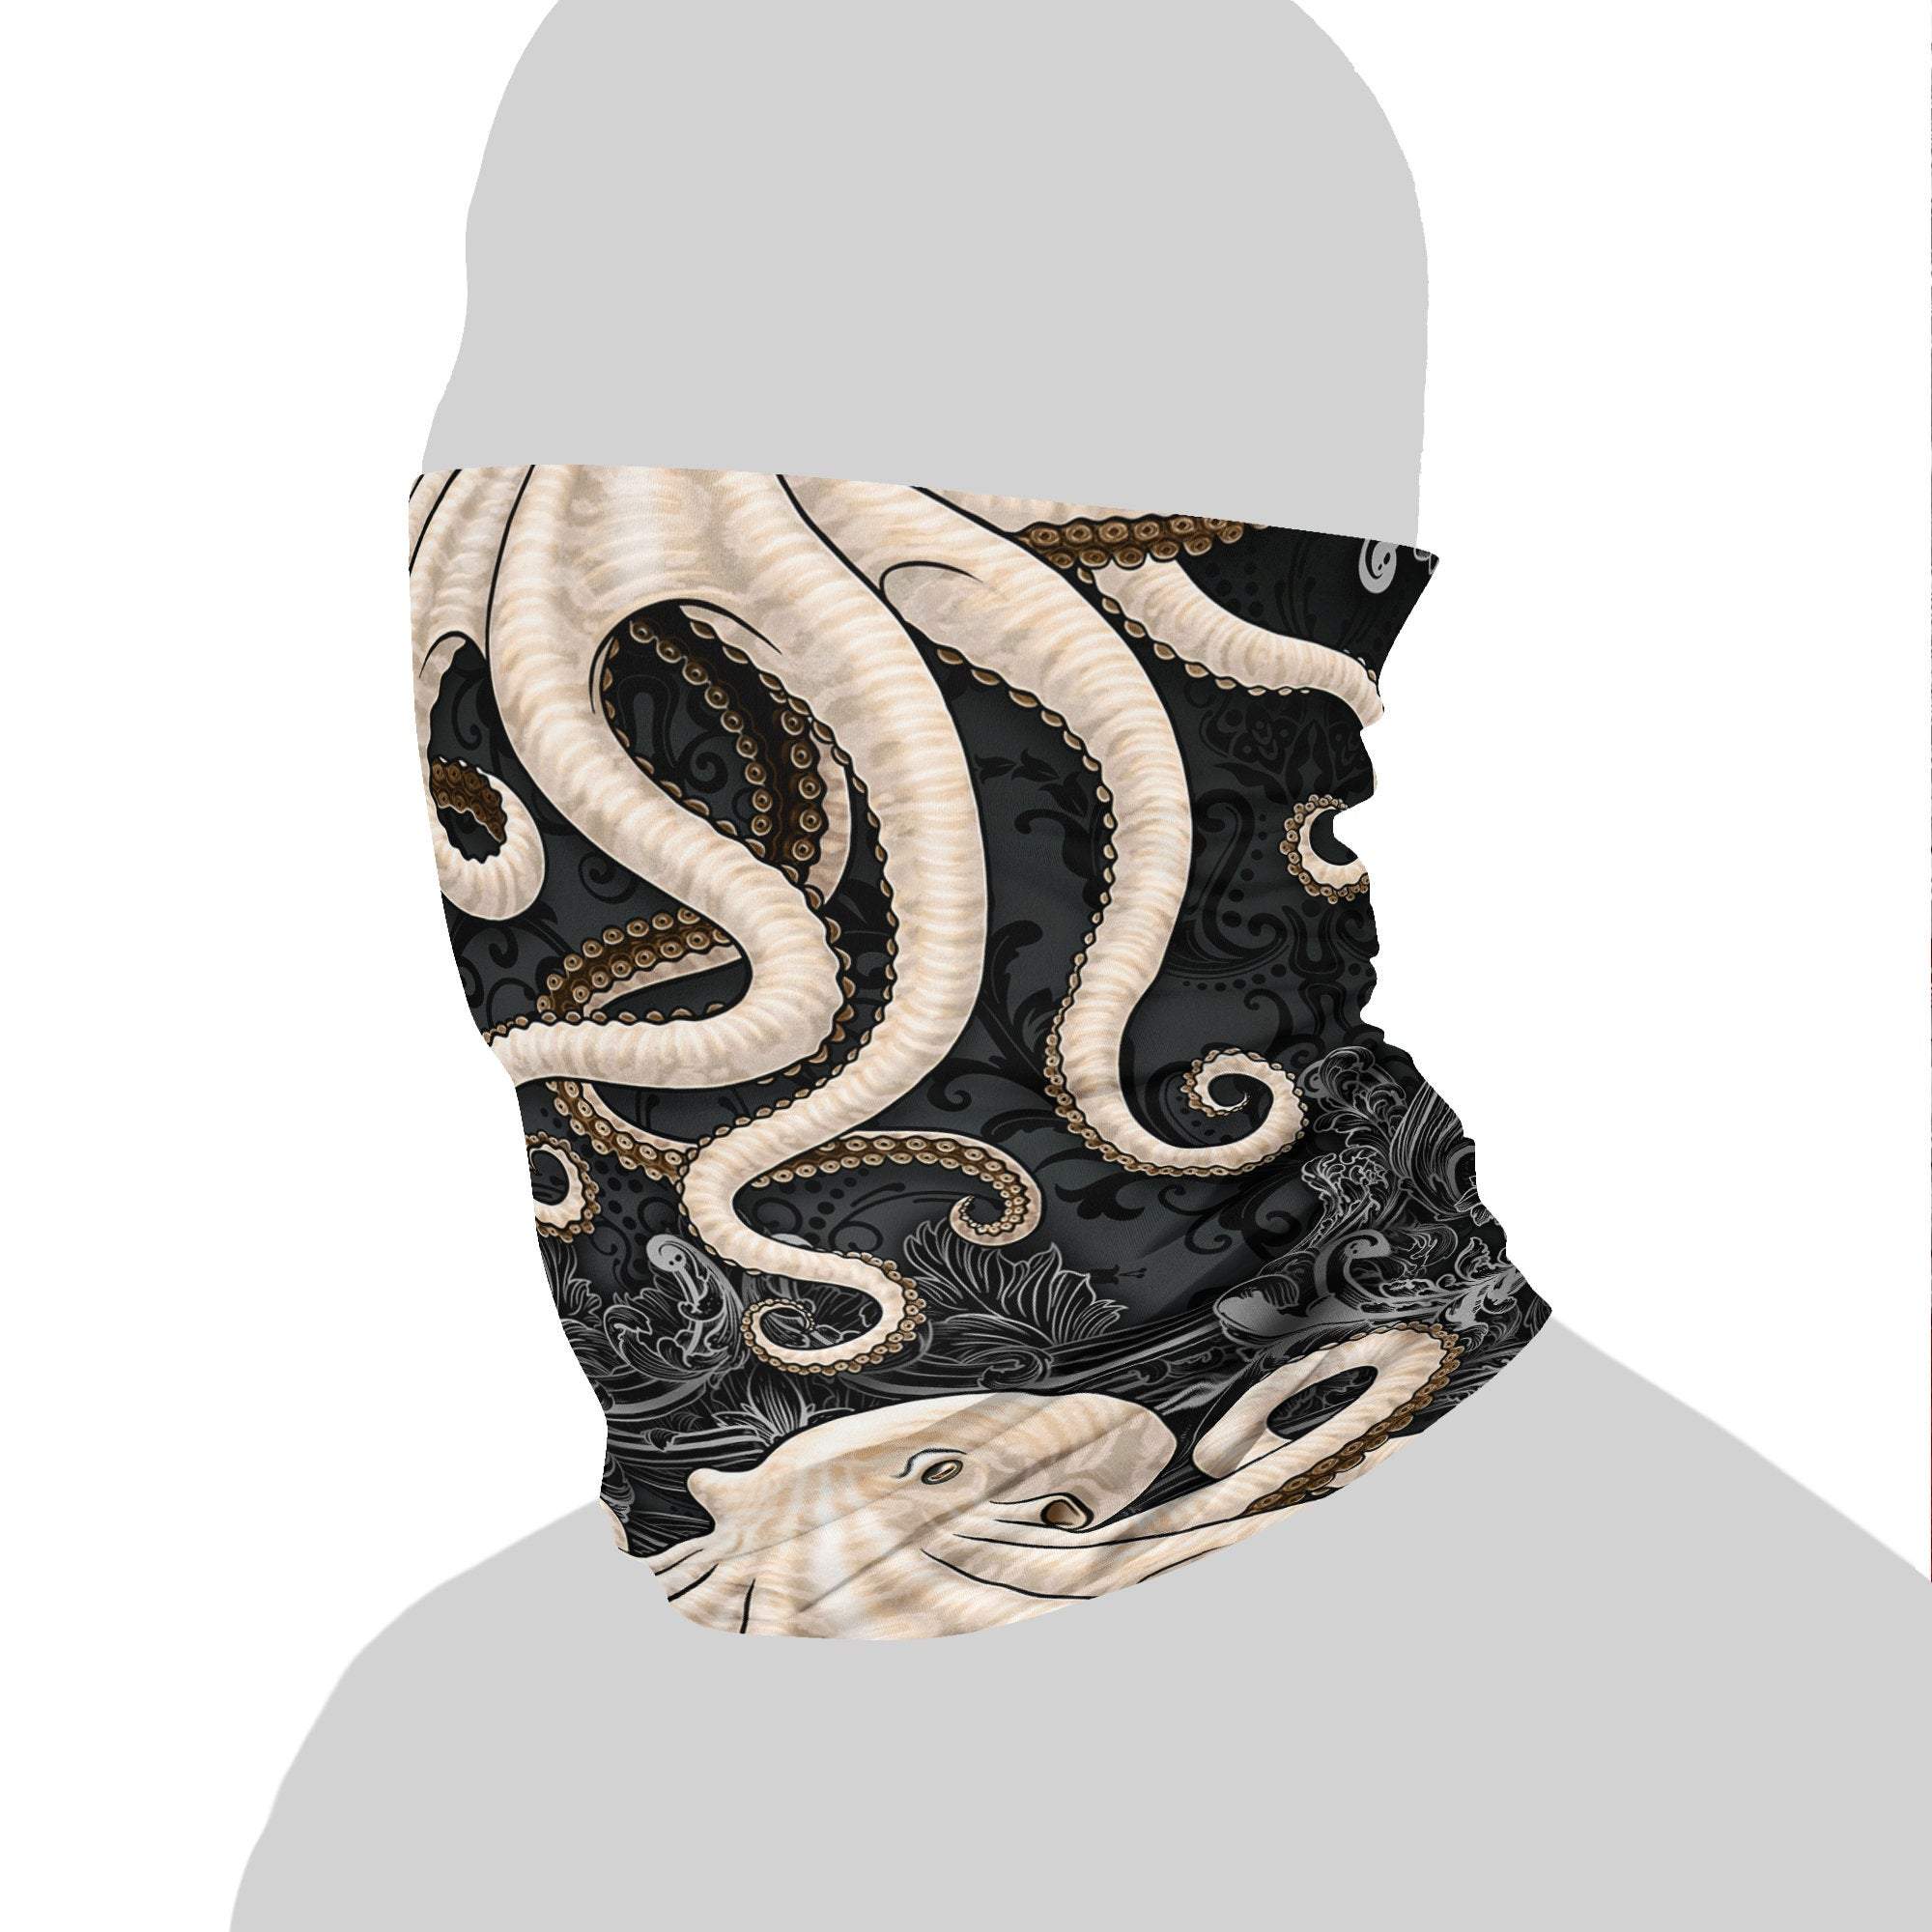 Octopus Neck Gaiter, Face Mask, Head Covering, Indie Outfit - Black & White - Abysm Internal